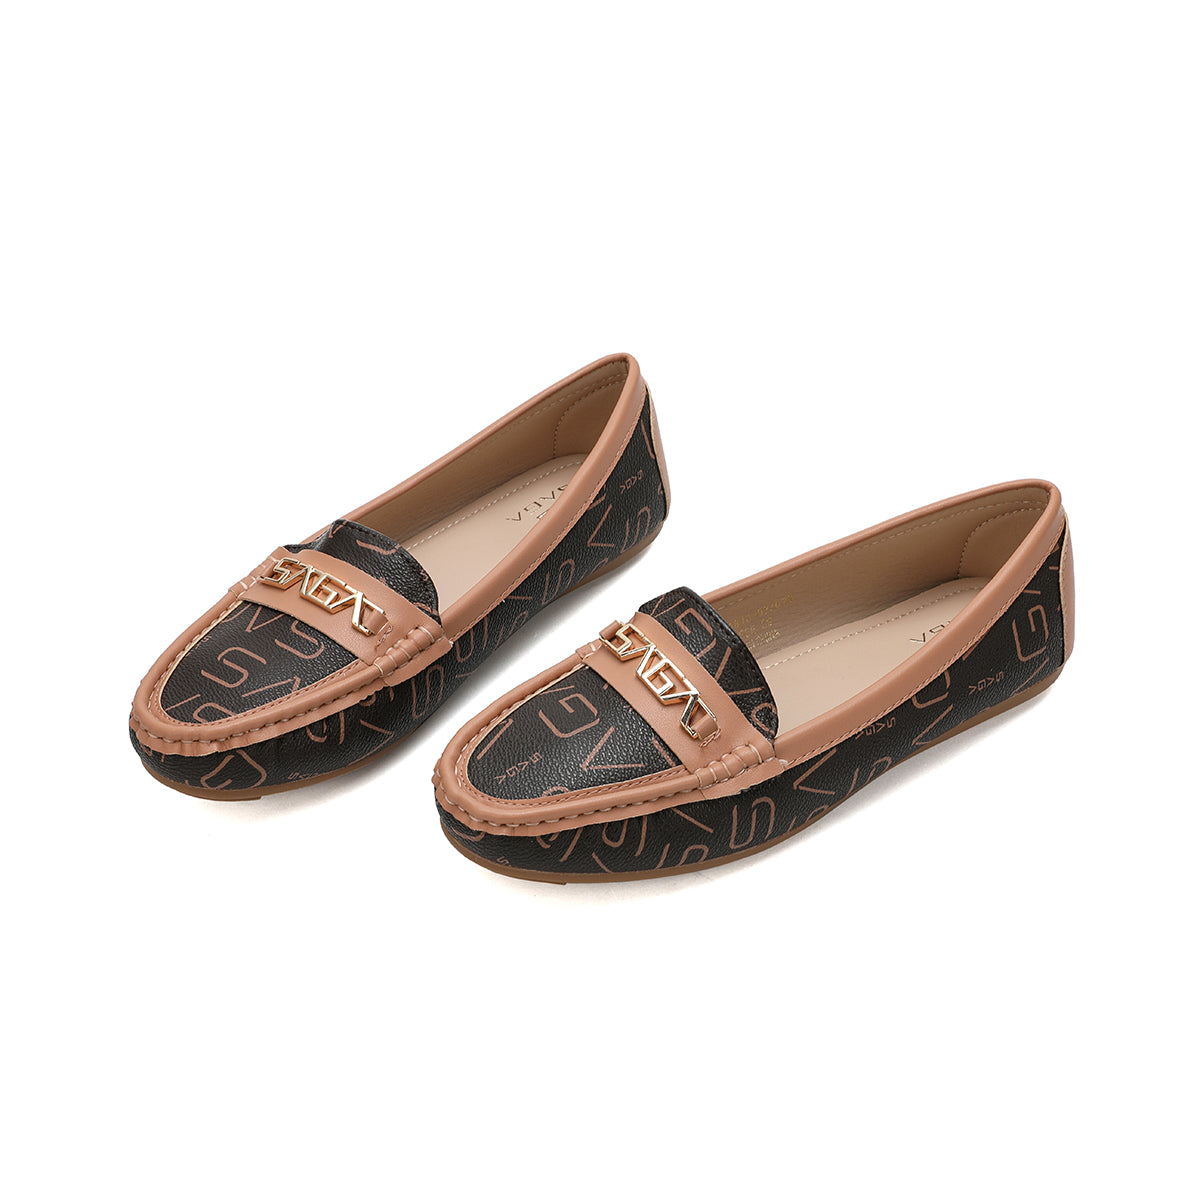 Comfortable, light and elegant shoes from Saga made of microfiber in coffee color